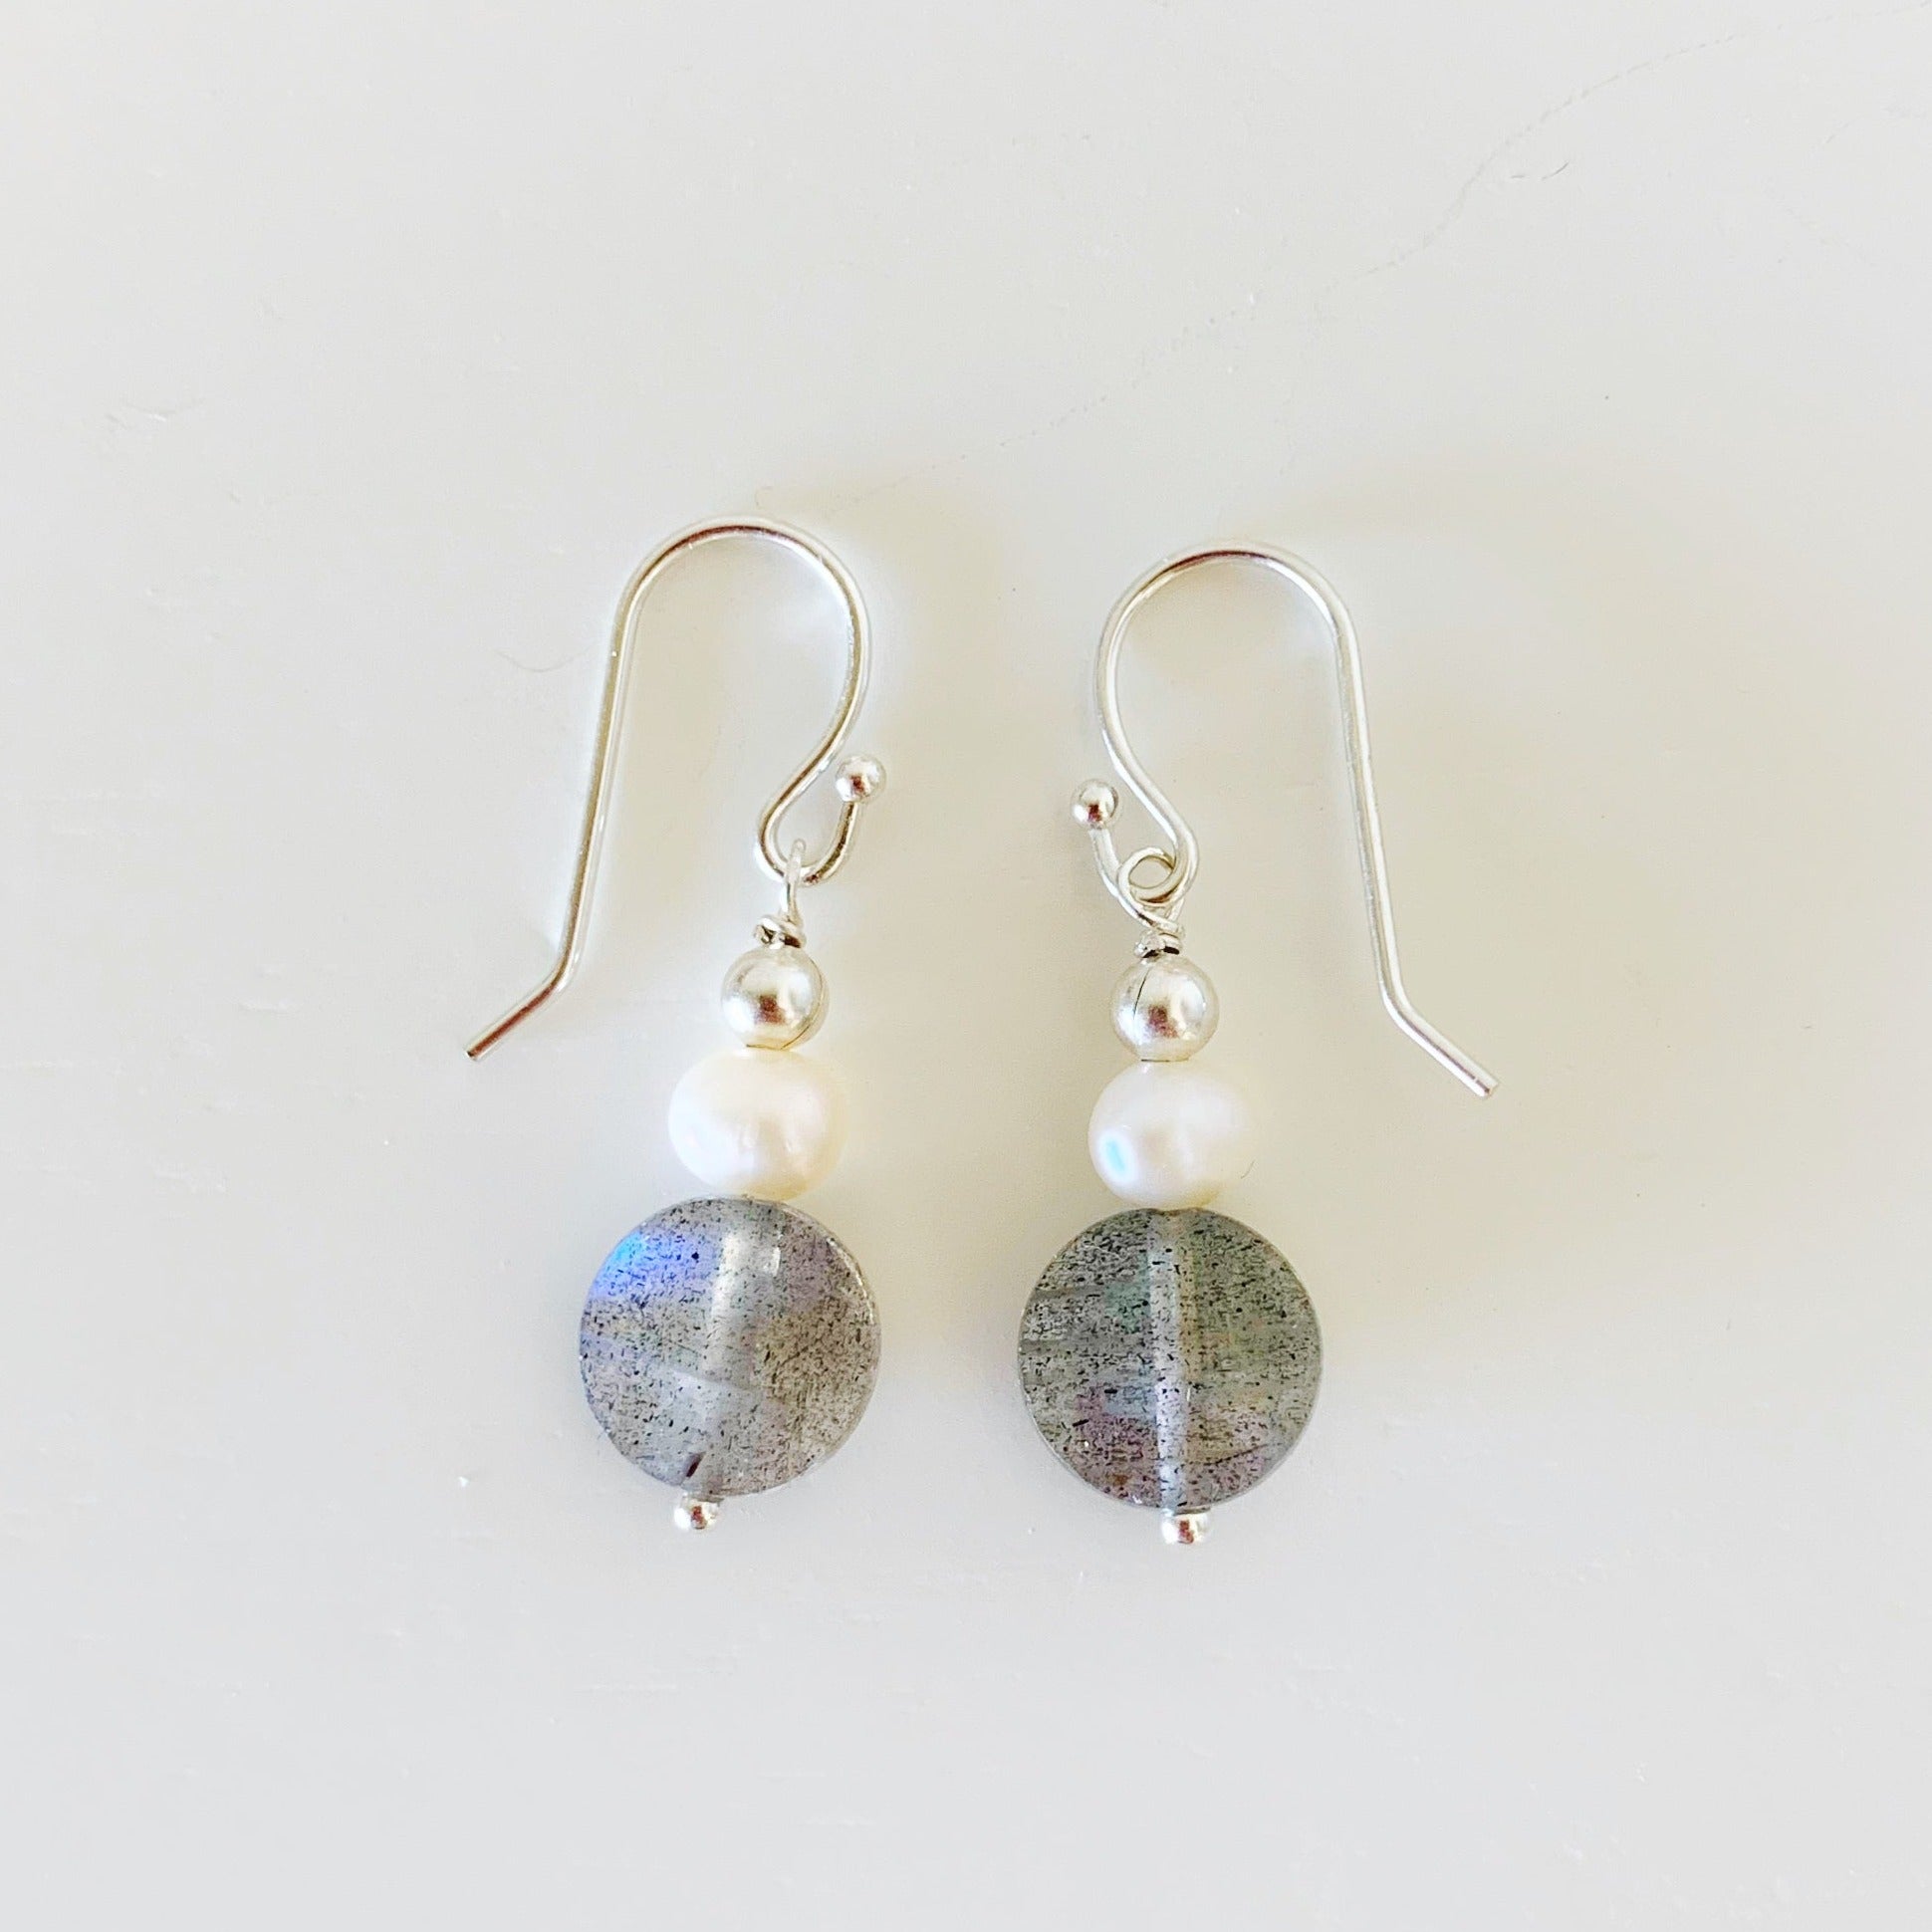 Arctic earrings by mermaids and madeleines are created with freshwater pearls, and faceted labradorite coins and sterling silver findings. this pair is photographed on a white surface